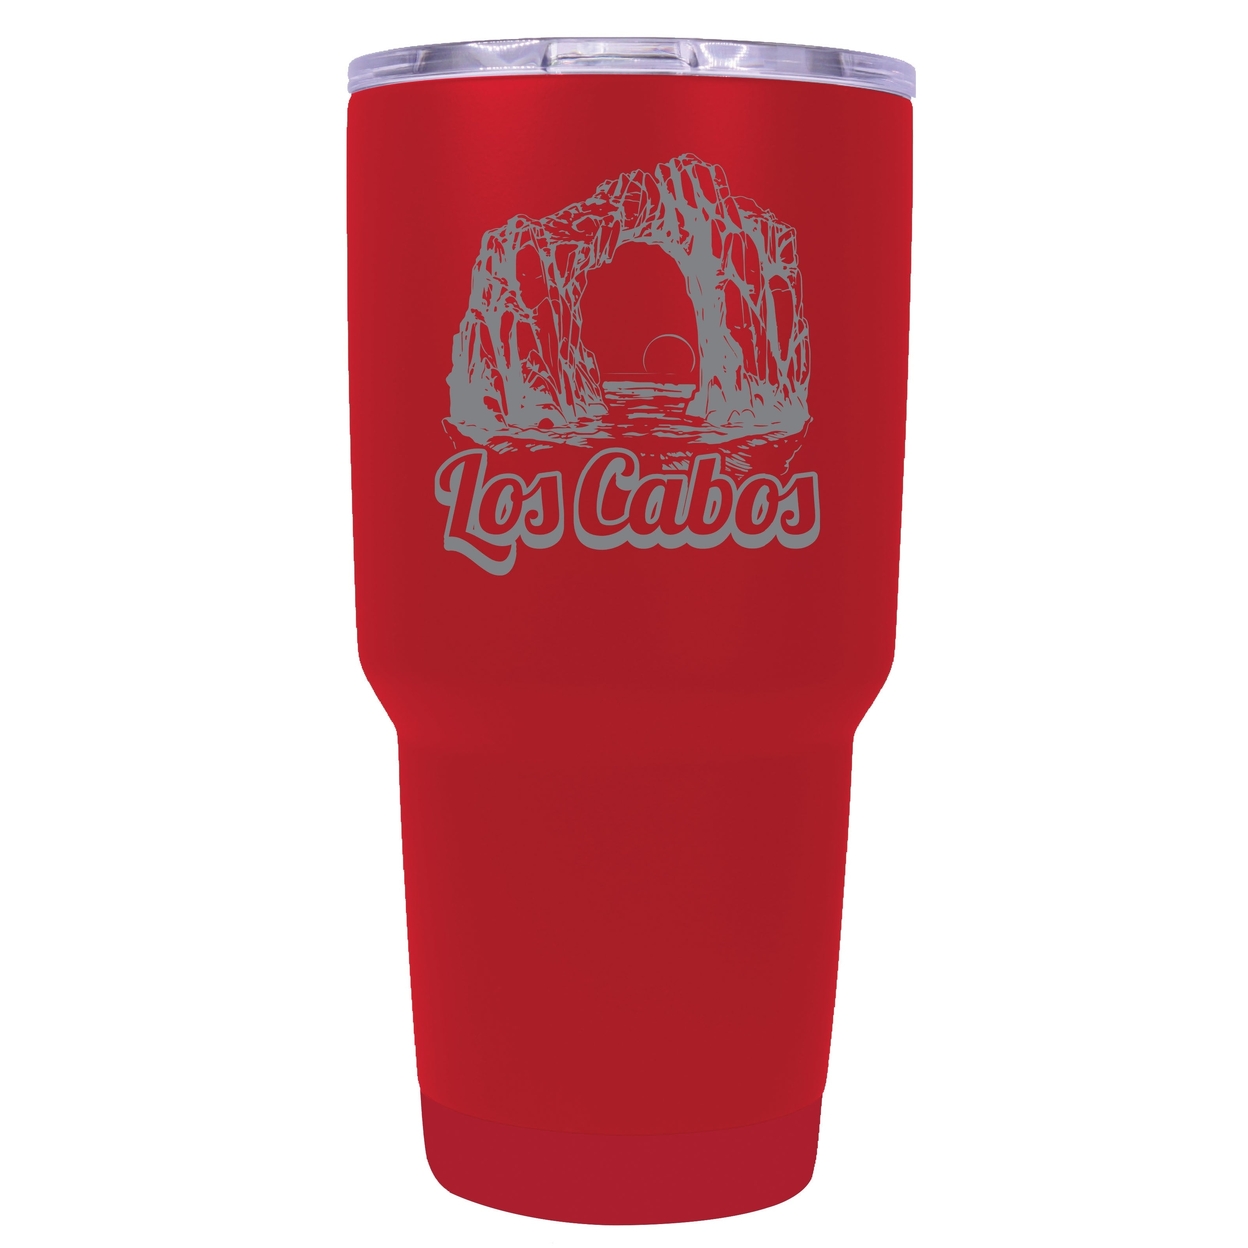 Los Cabos Mexico Souvenir 24 Oz Engraved Insulated Stainless Steel Tumbler - Black,,4-Pack